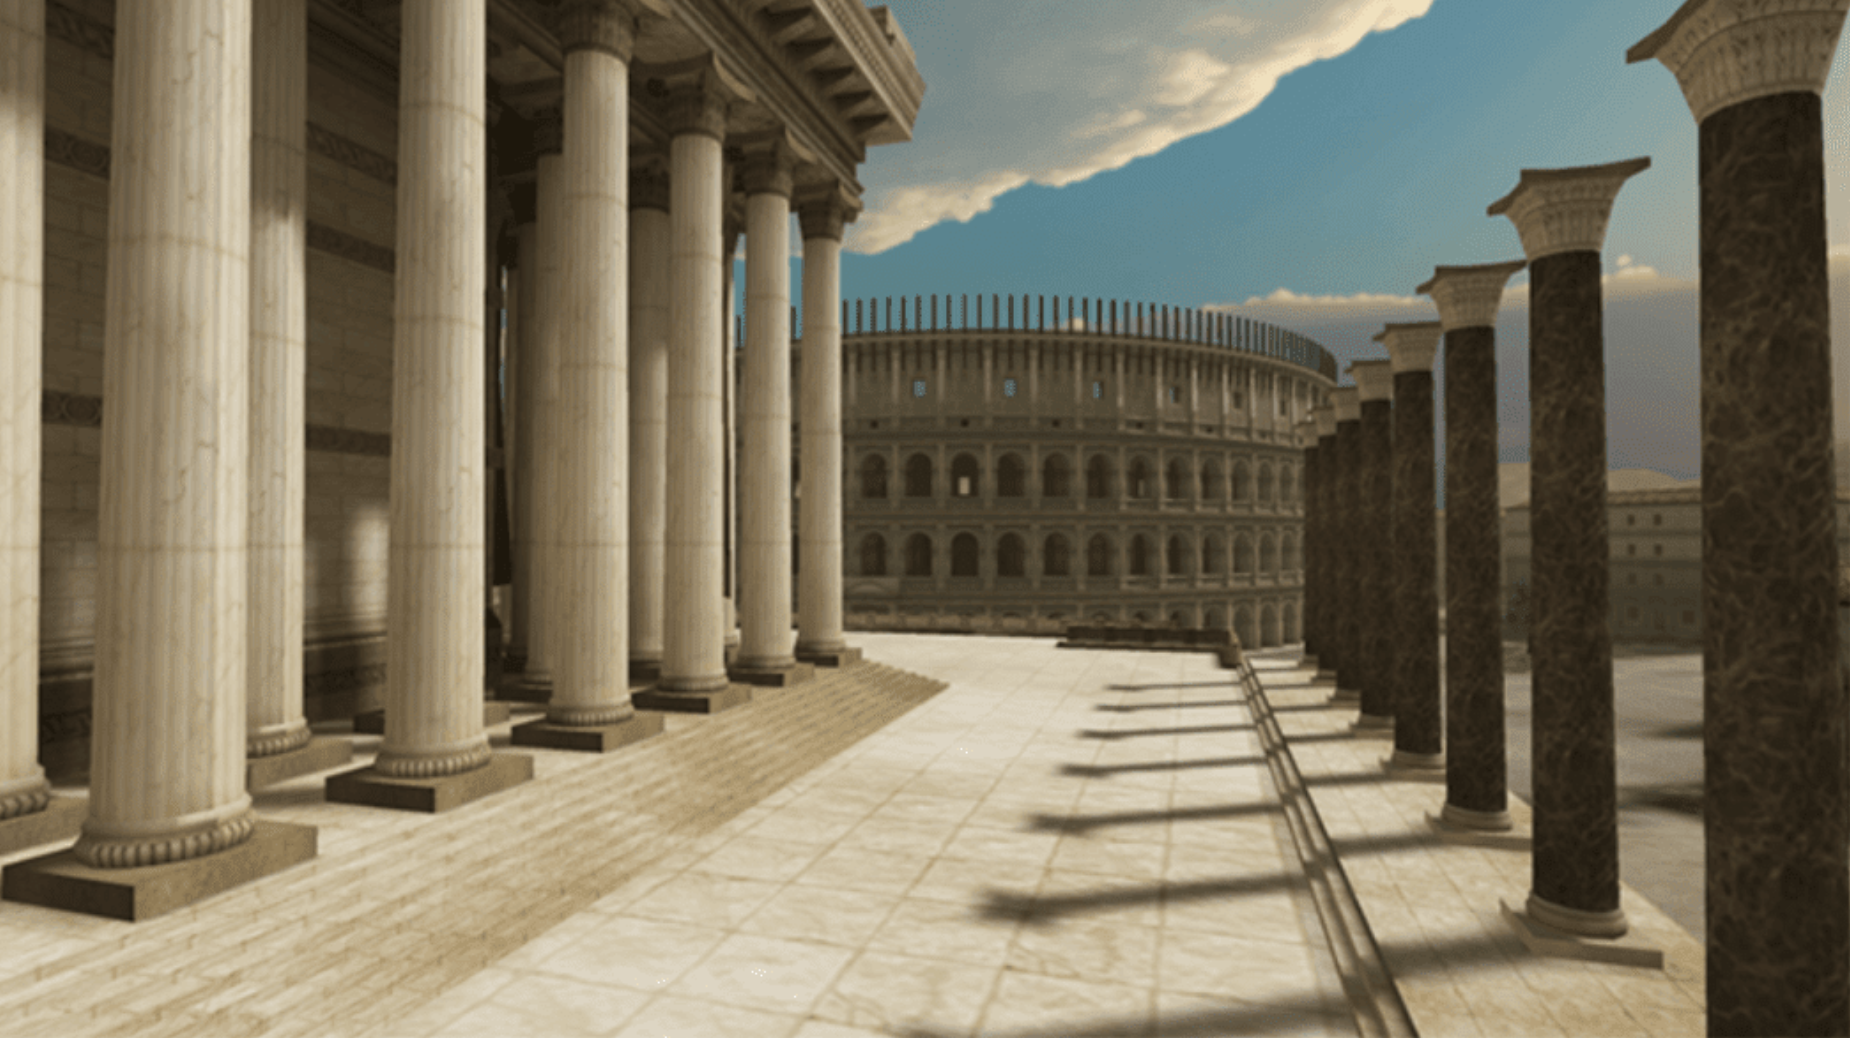 Rather than reading about Rome, VR headsets let students be transported to Rome